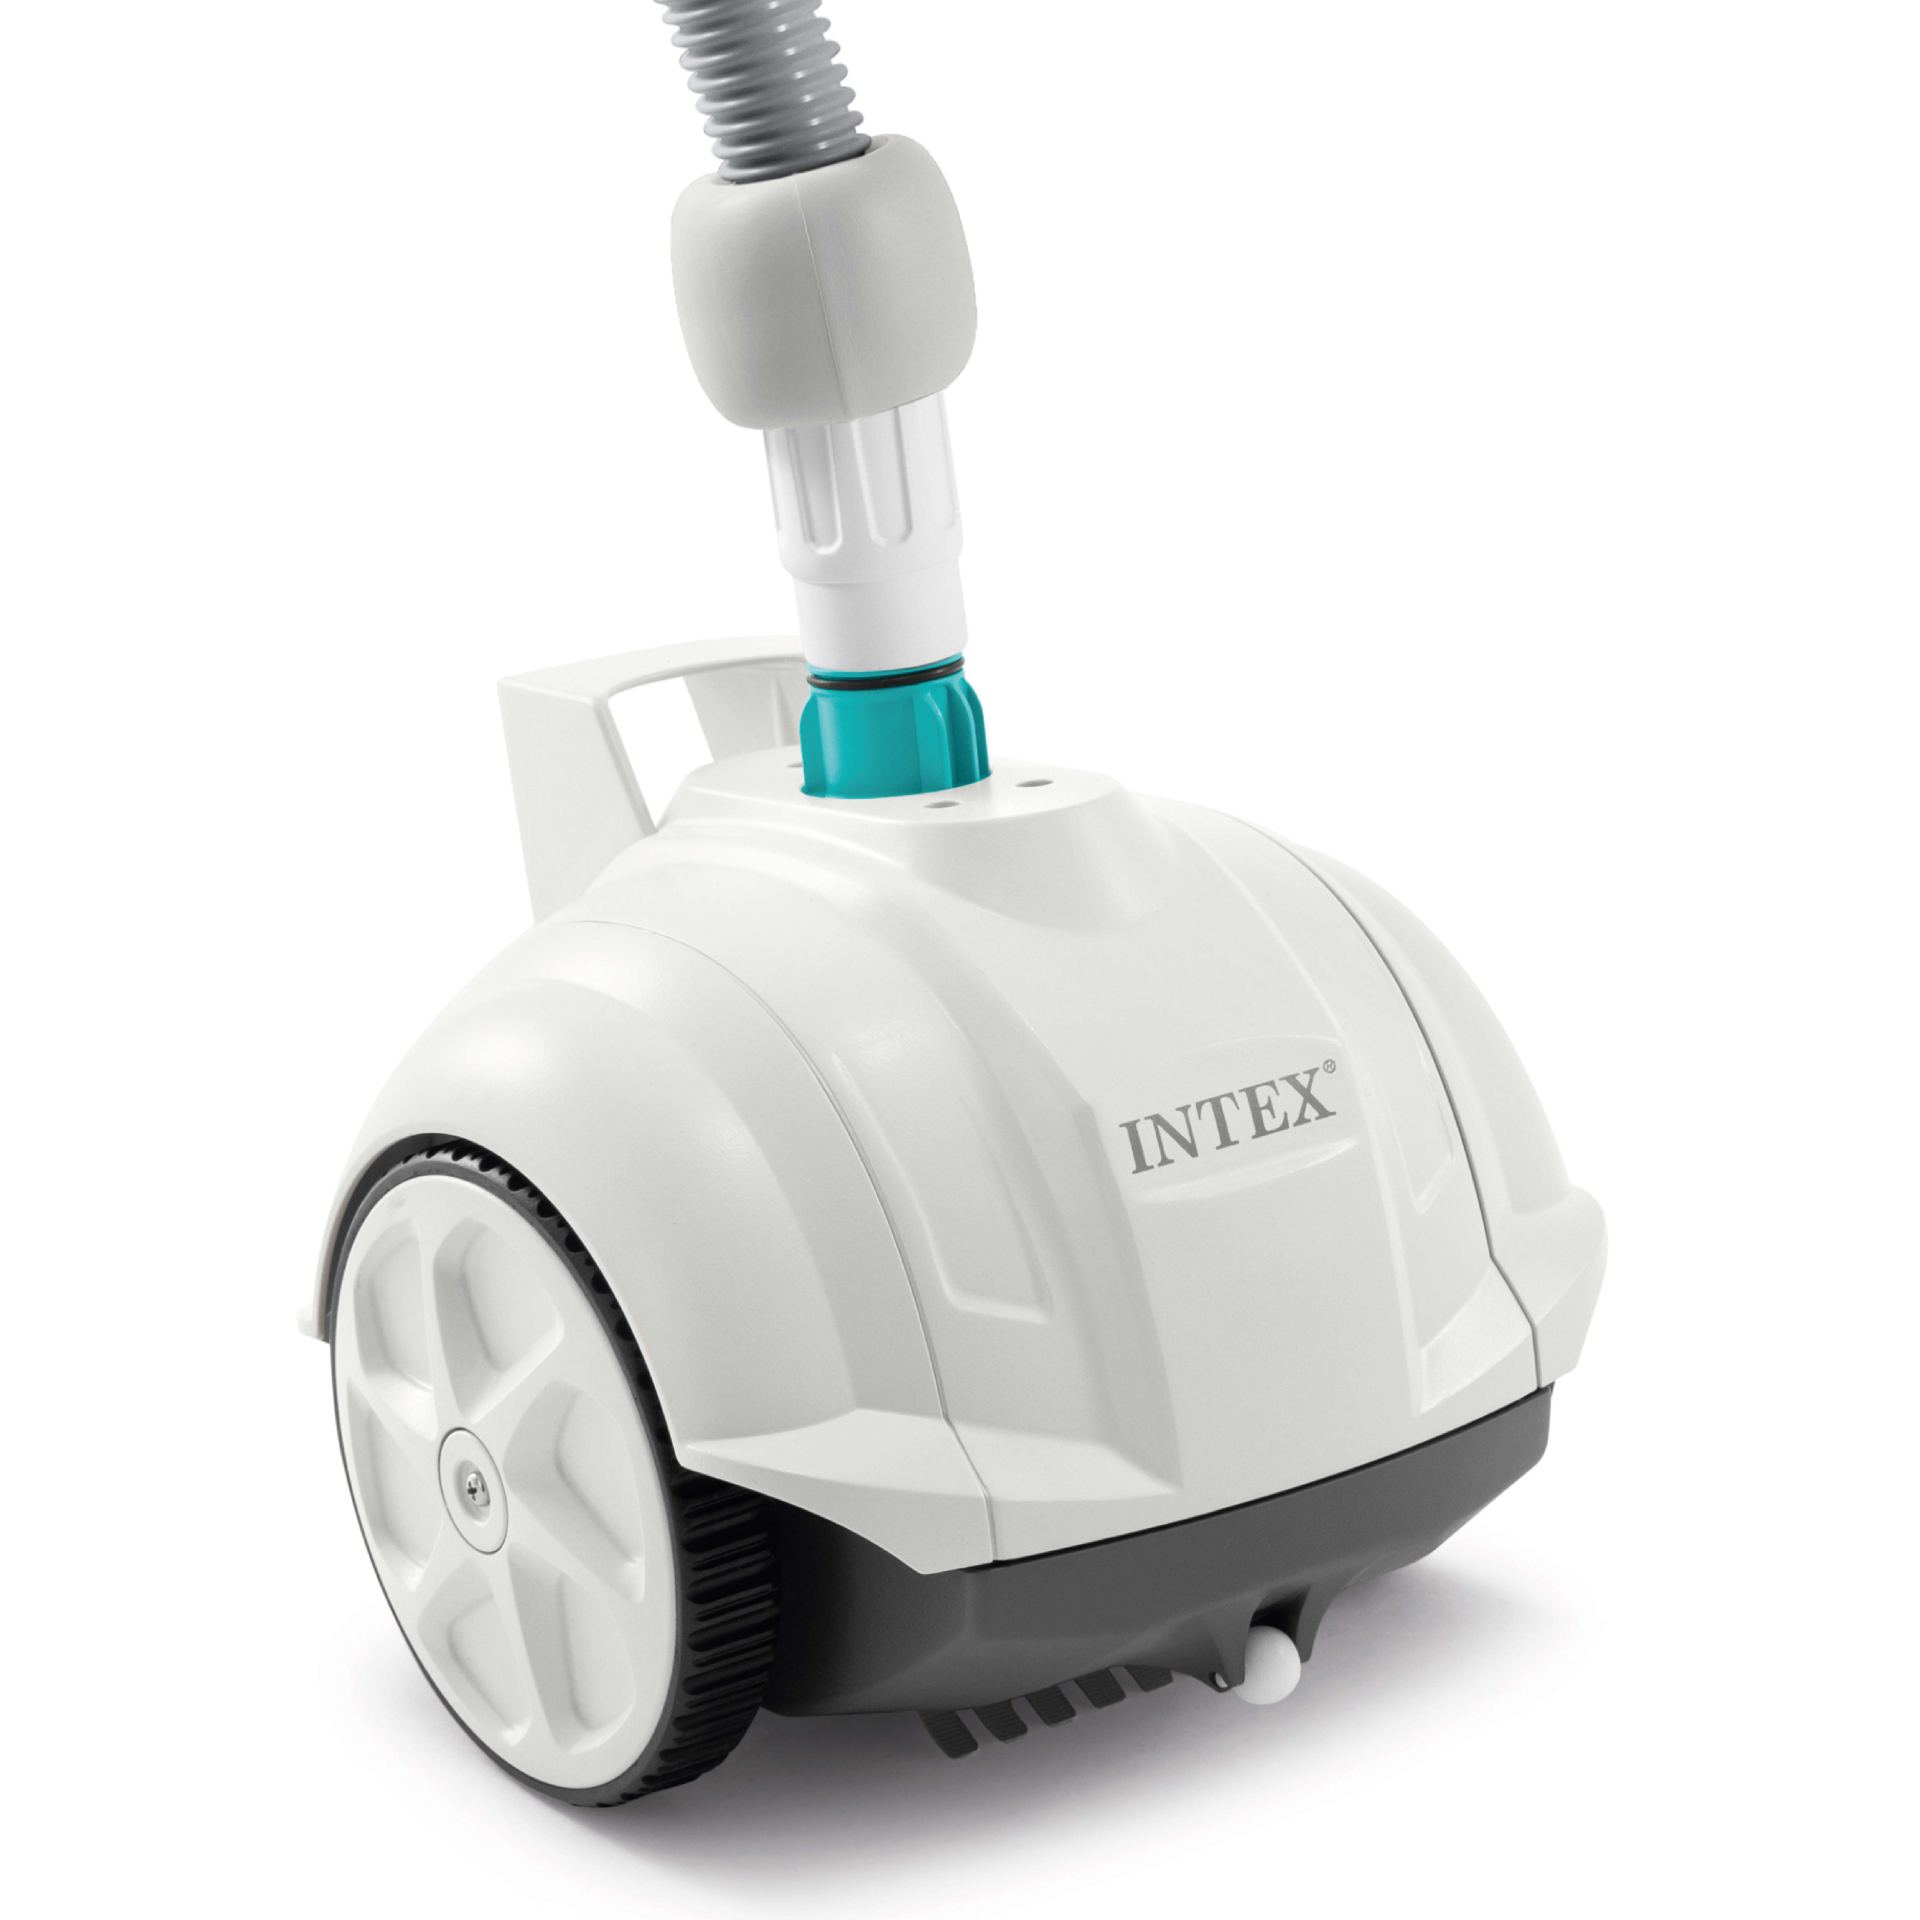 Intex ZX50 deluxe automatic pool cleaner